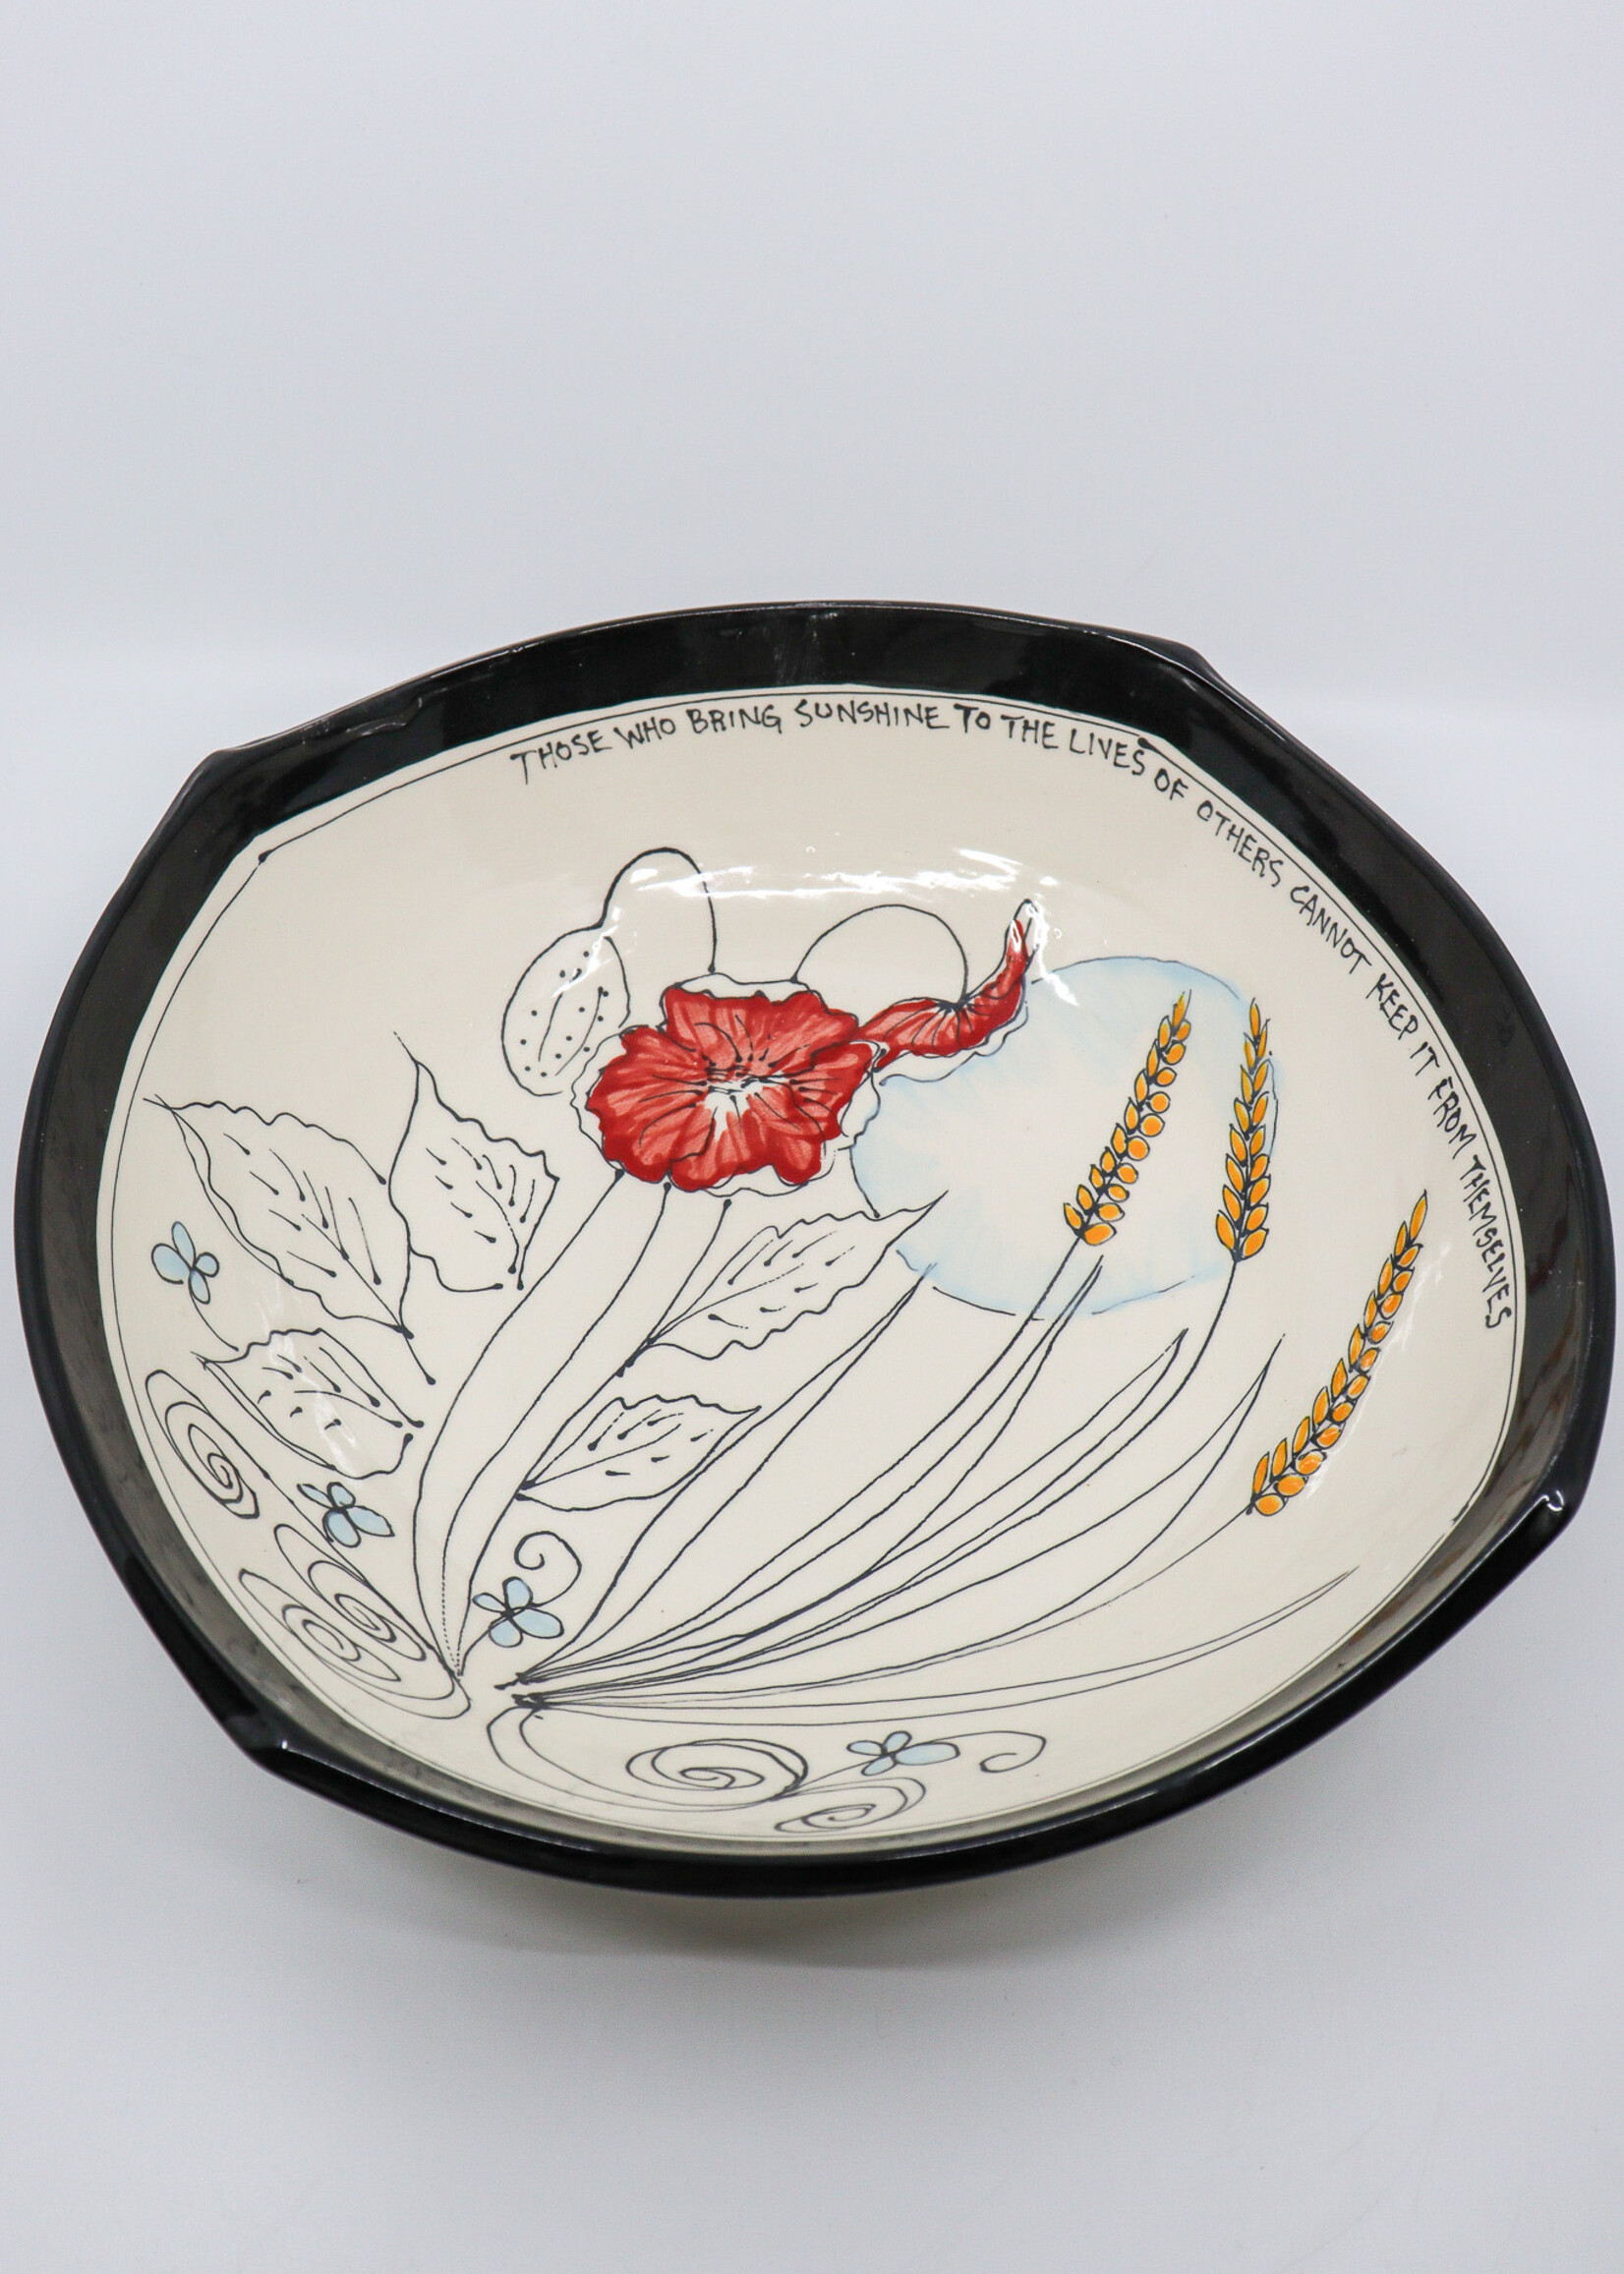 CERAMICS - 12" Bowl, Poppies and Wheat, " Those Who Bring Sunshine into the Lives of others cannot Keep It From Themselves"